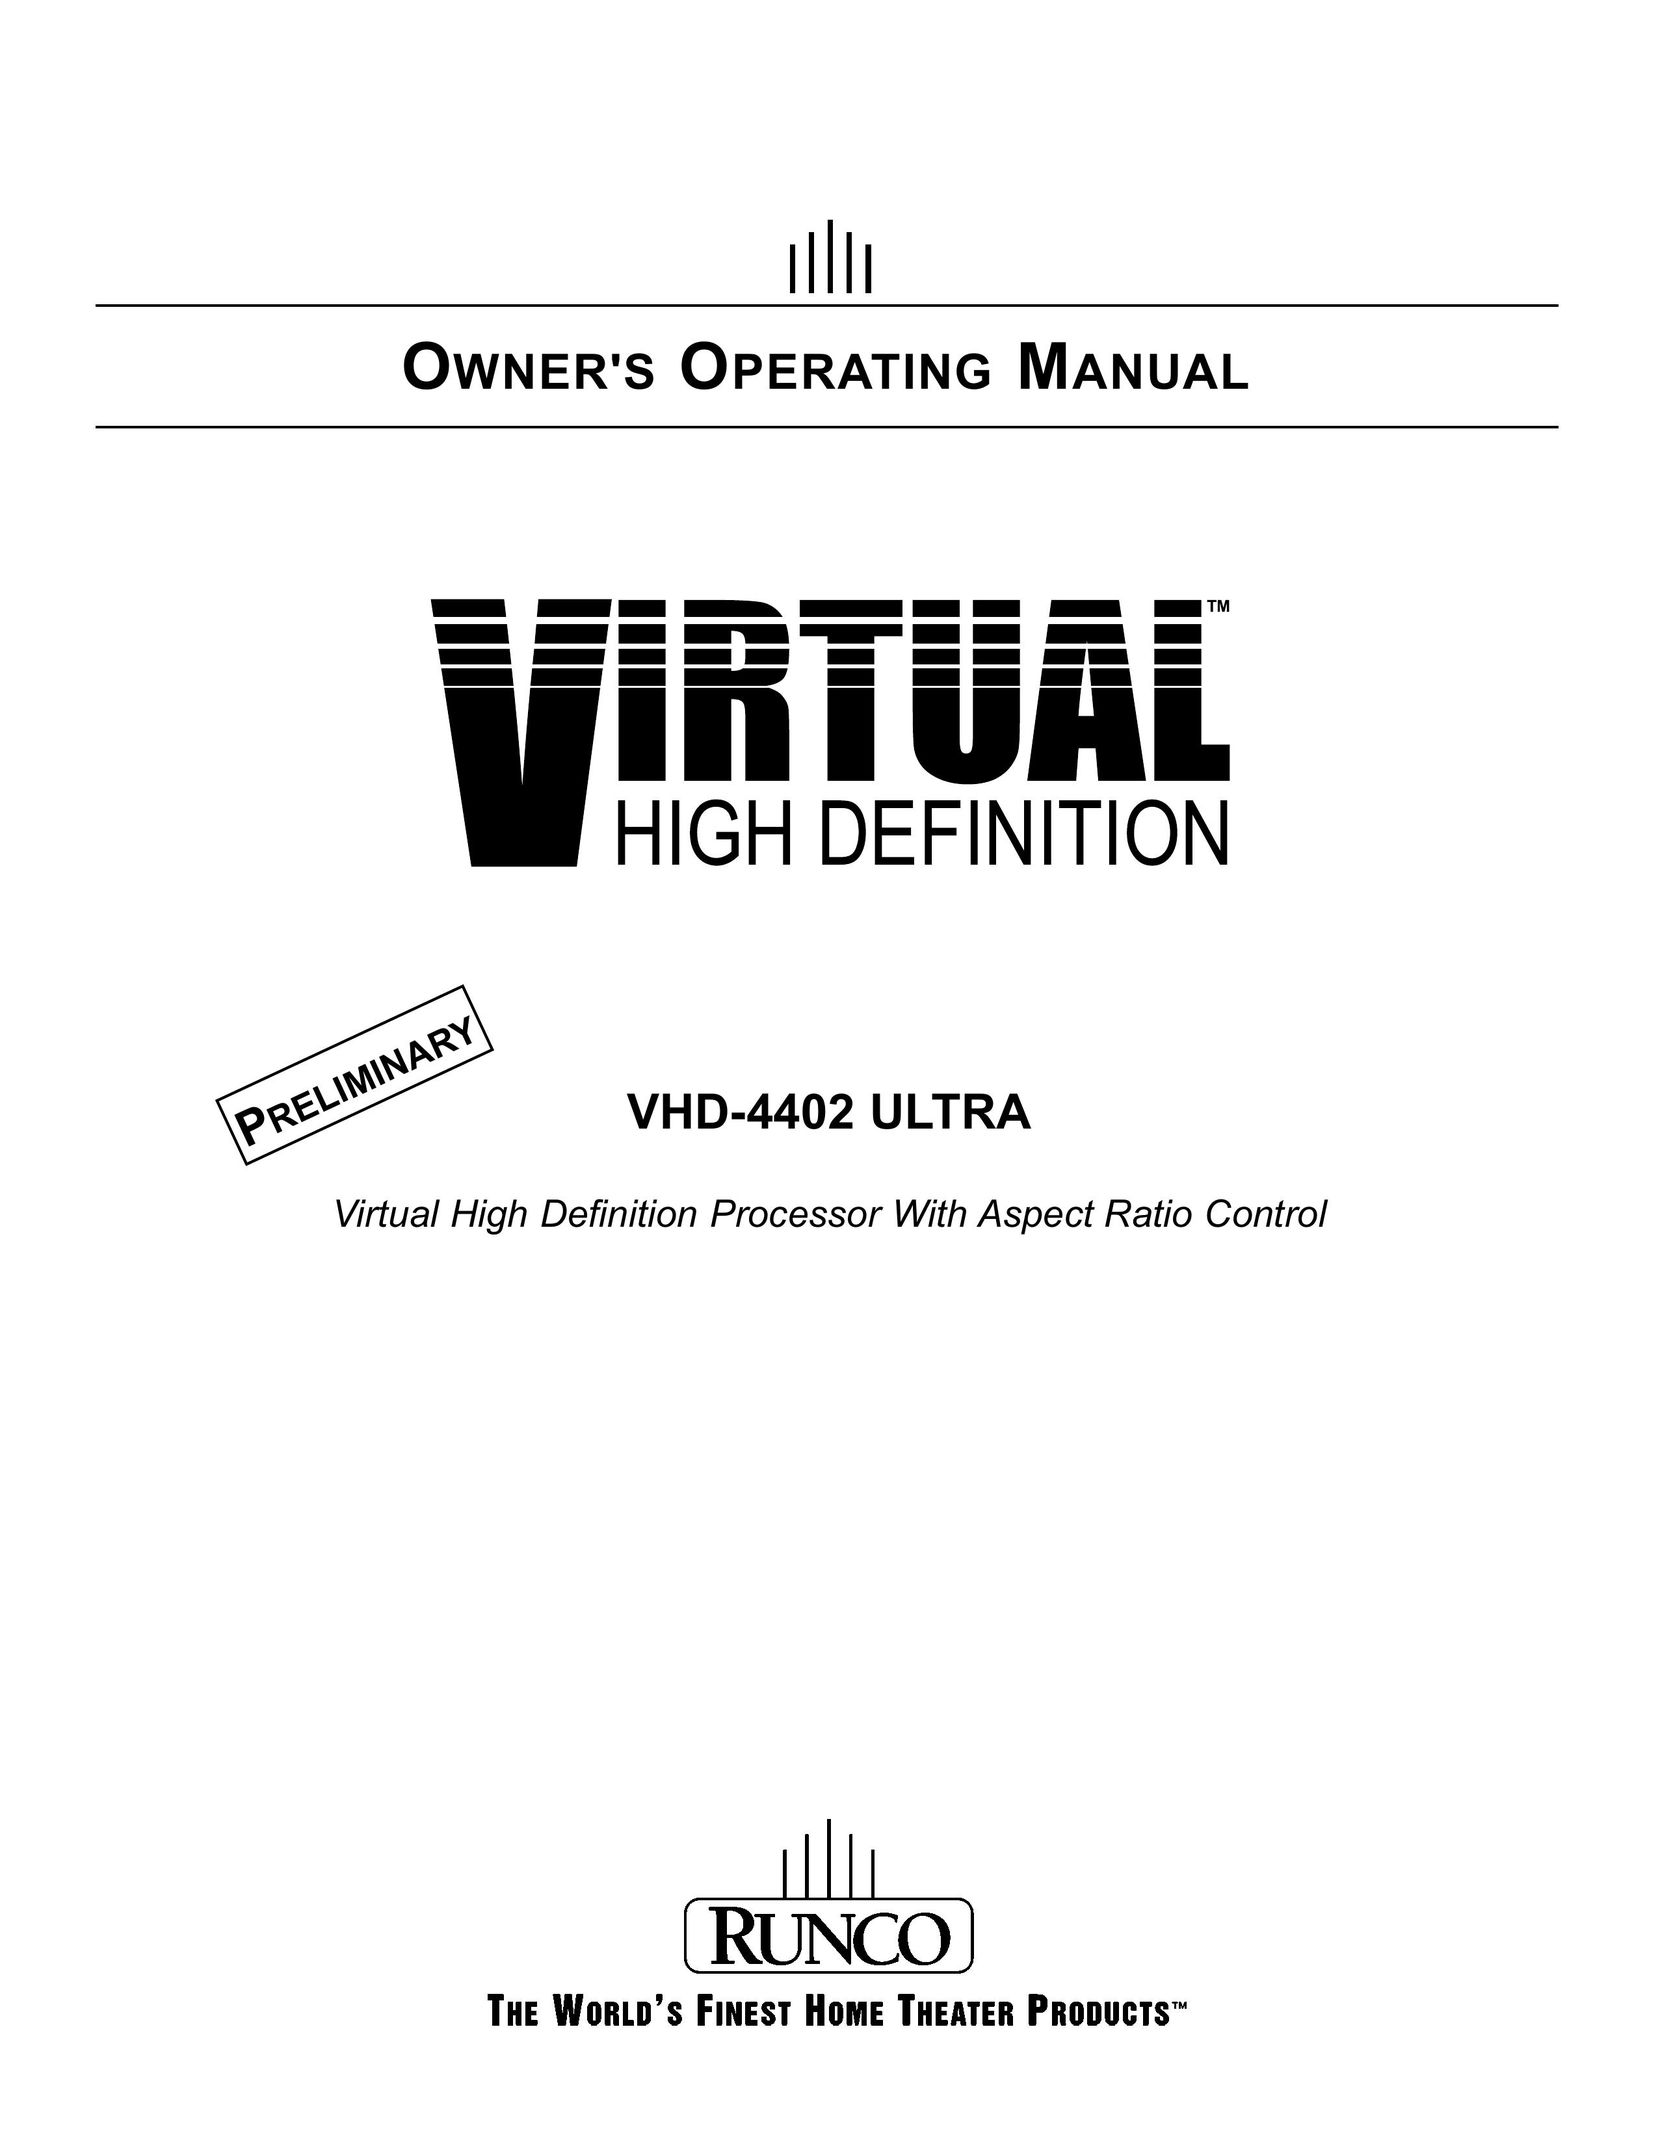 Runco VHD-4402 Home Theater System User Manual